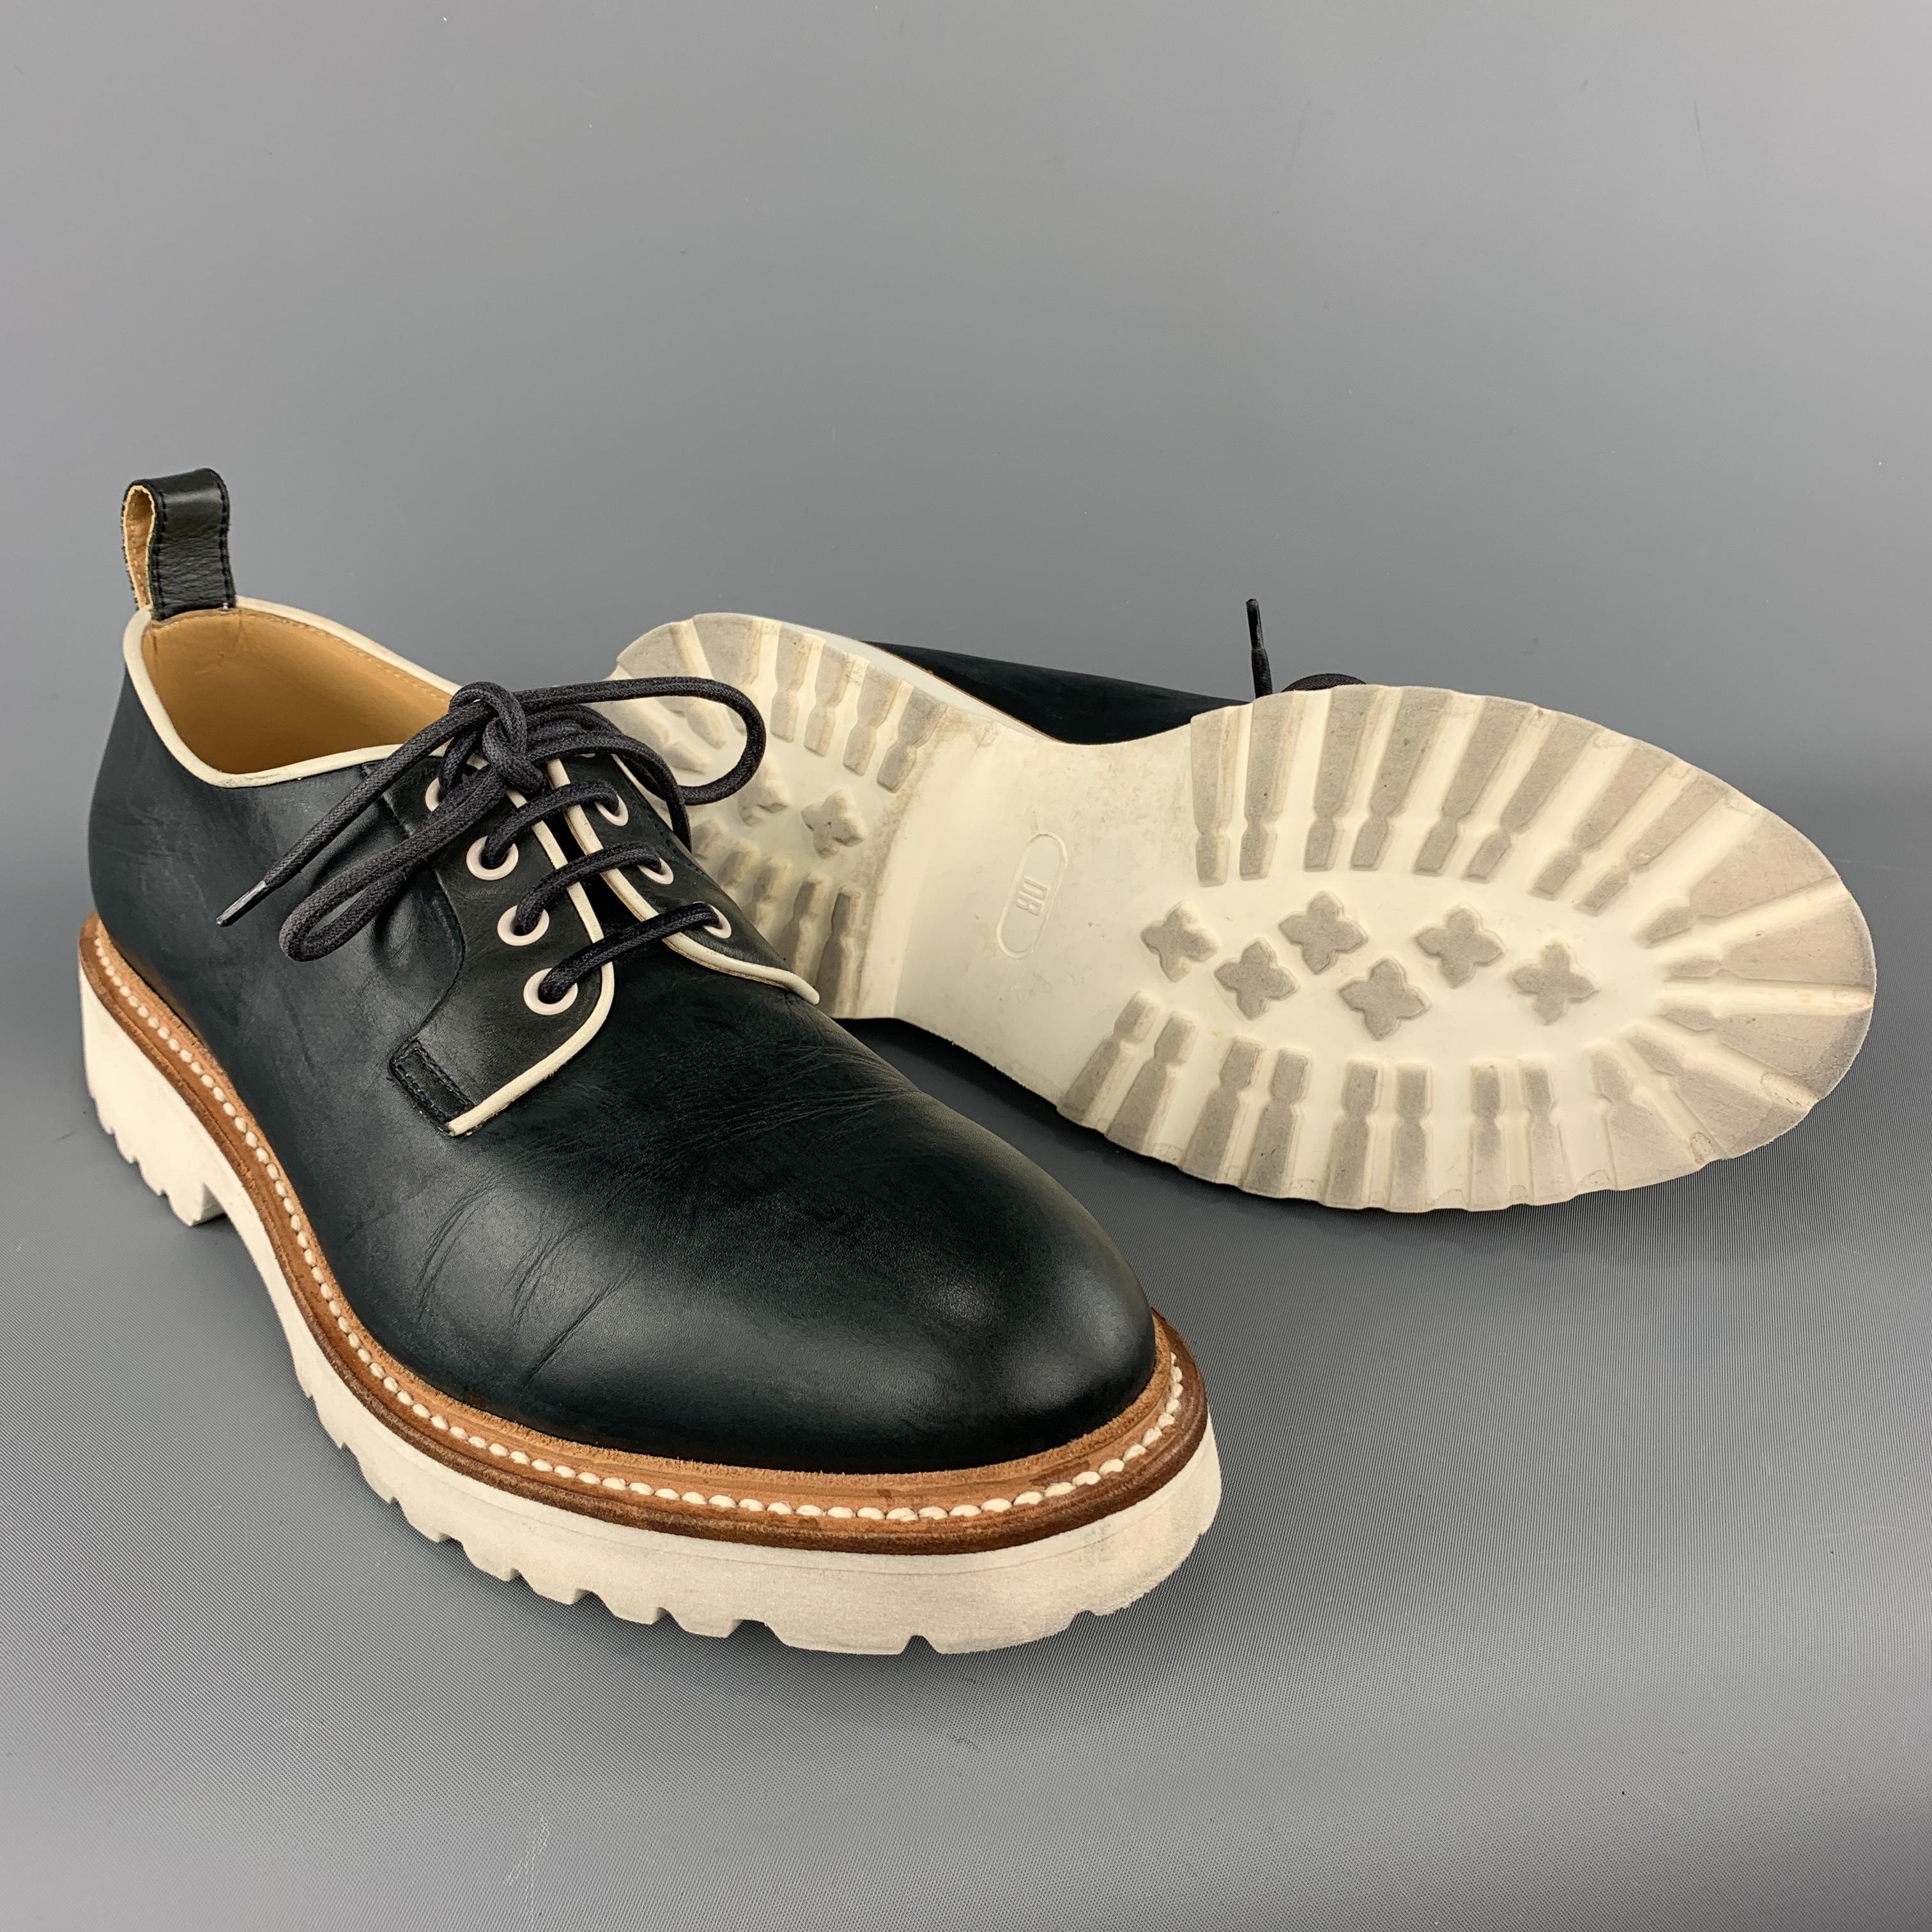 Dirk Bikkembergs lace ups come in teal navy smooth leather with a tan leather midsole and white rubber sole.  Made in Italy.
 

Very Good Pre-Owned Condition.
Marked: IT 44

Outsole: 12.45 x 4.5 in.